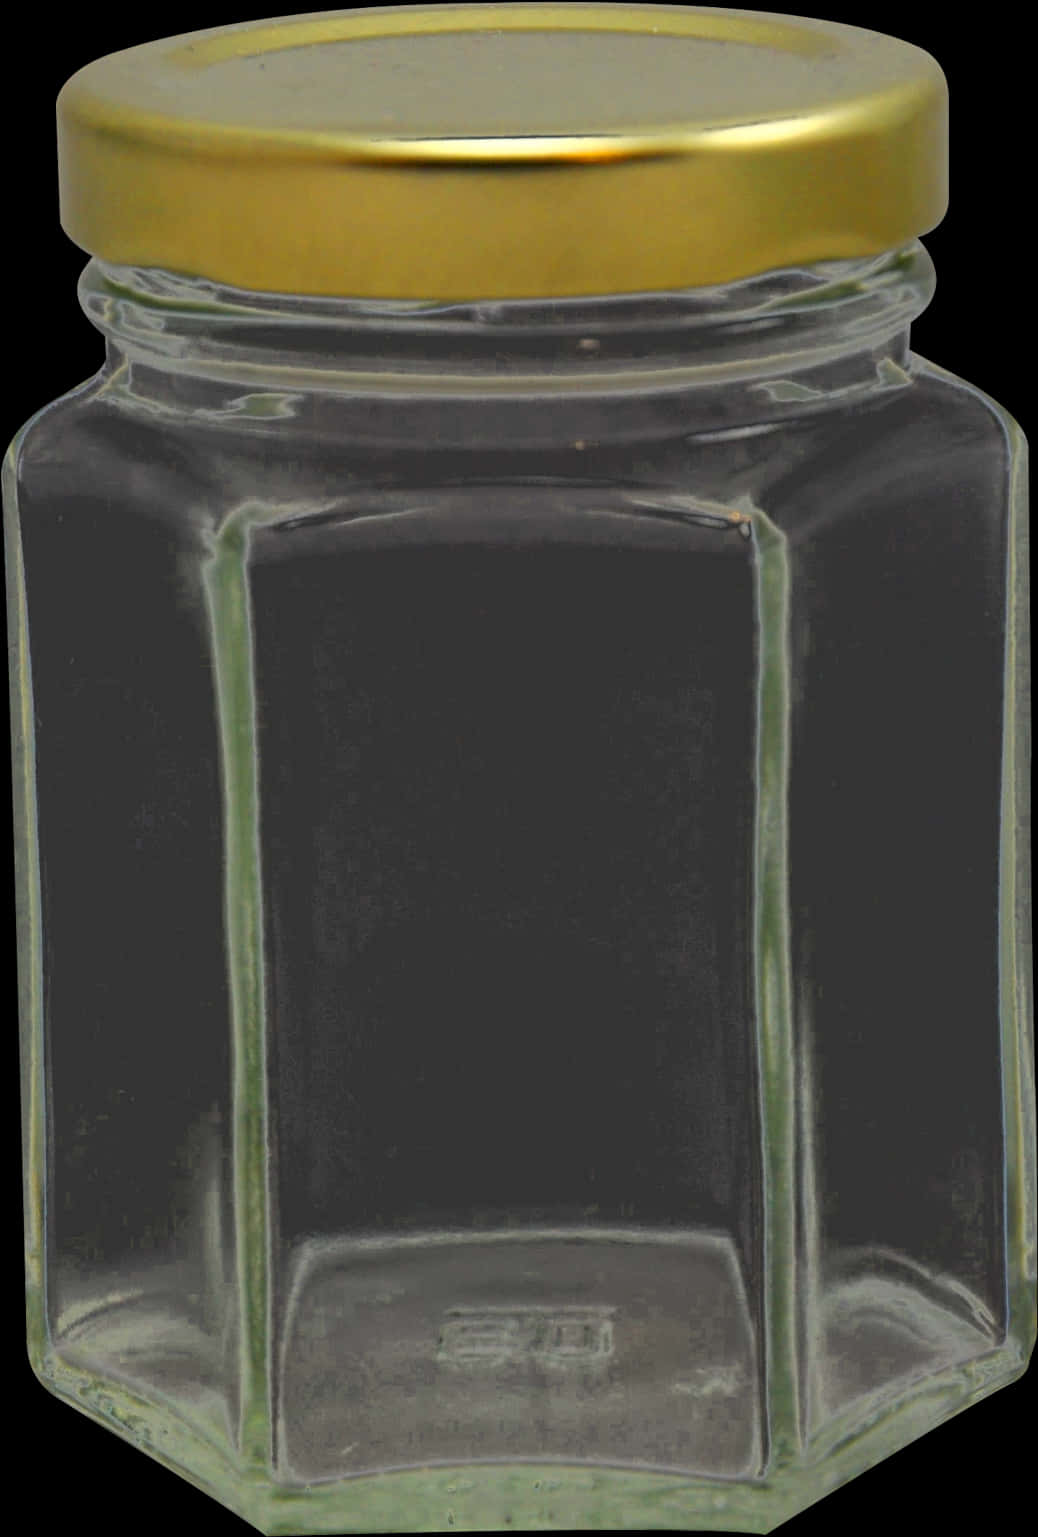 A Glass Jar With A Yellow Lid